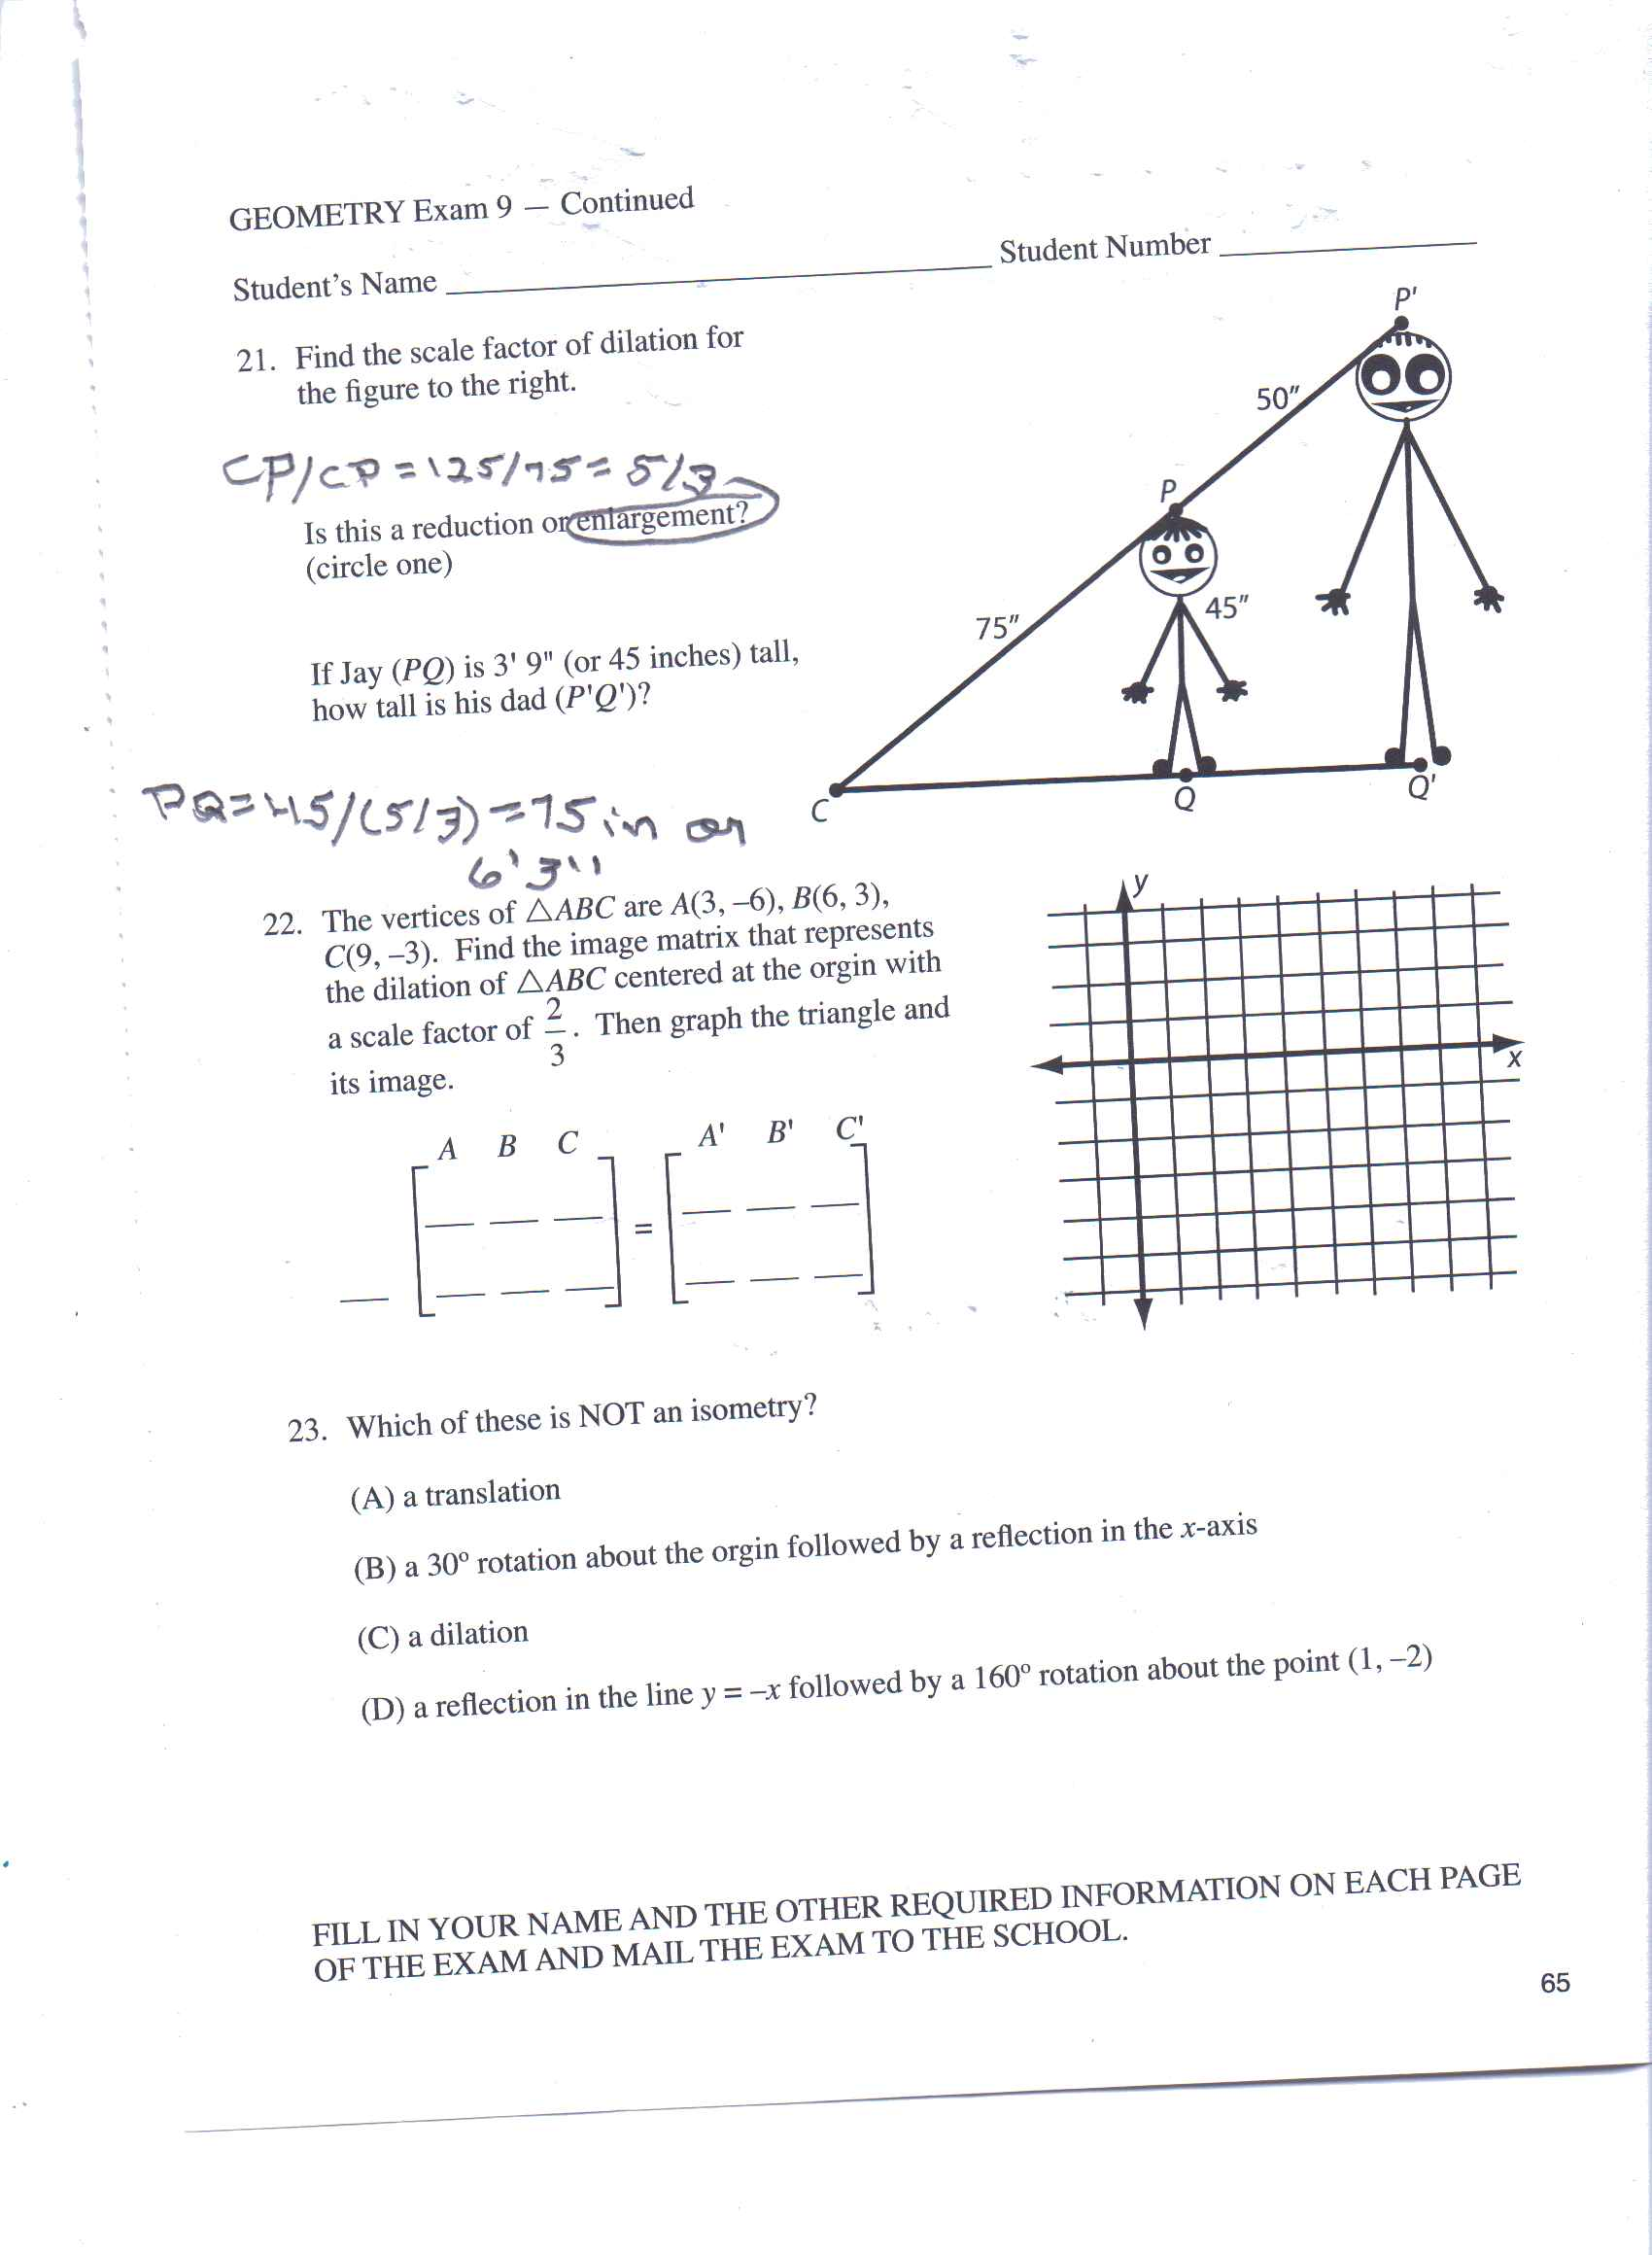 Dilations And Scale Factor Worksheet